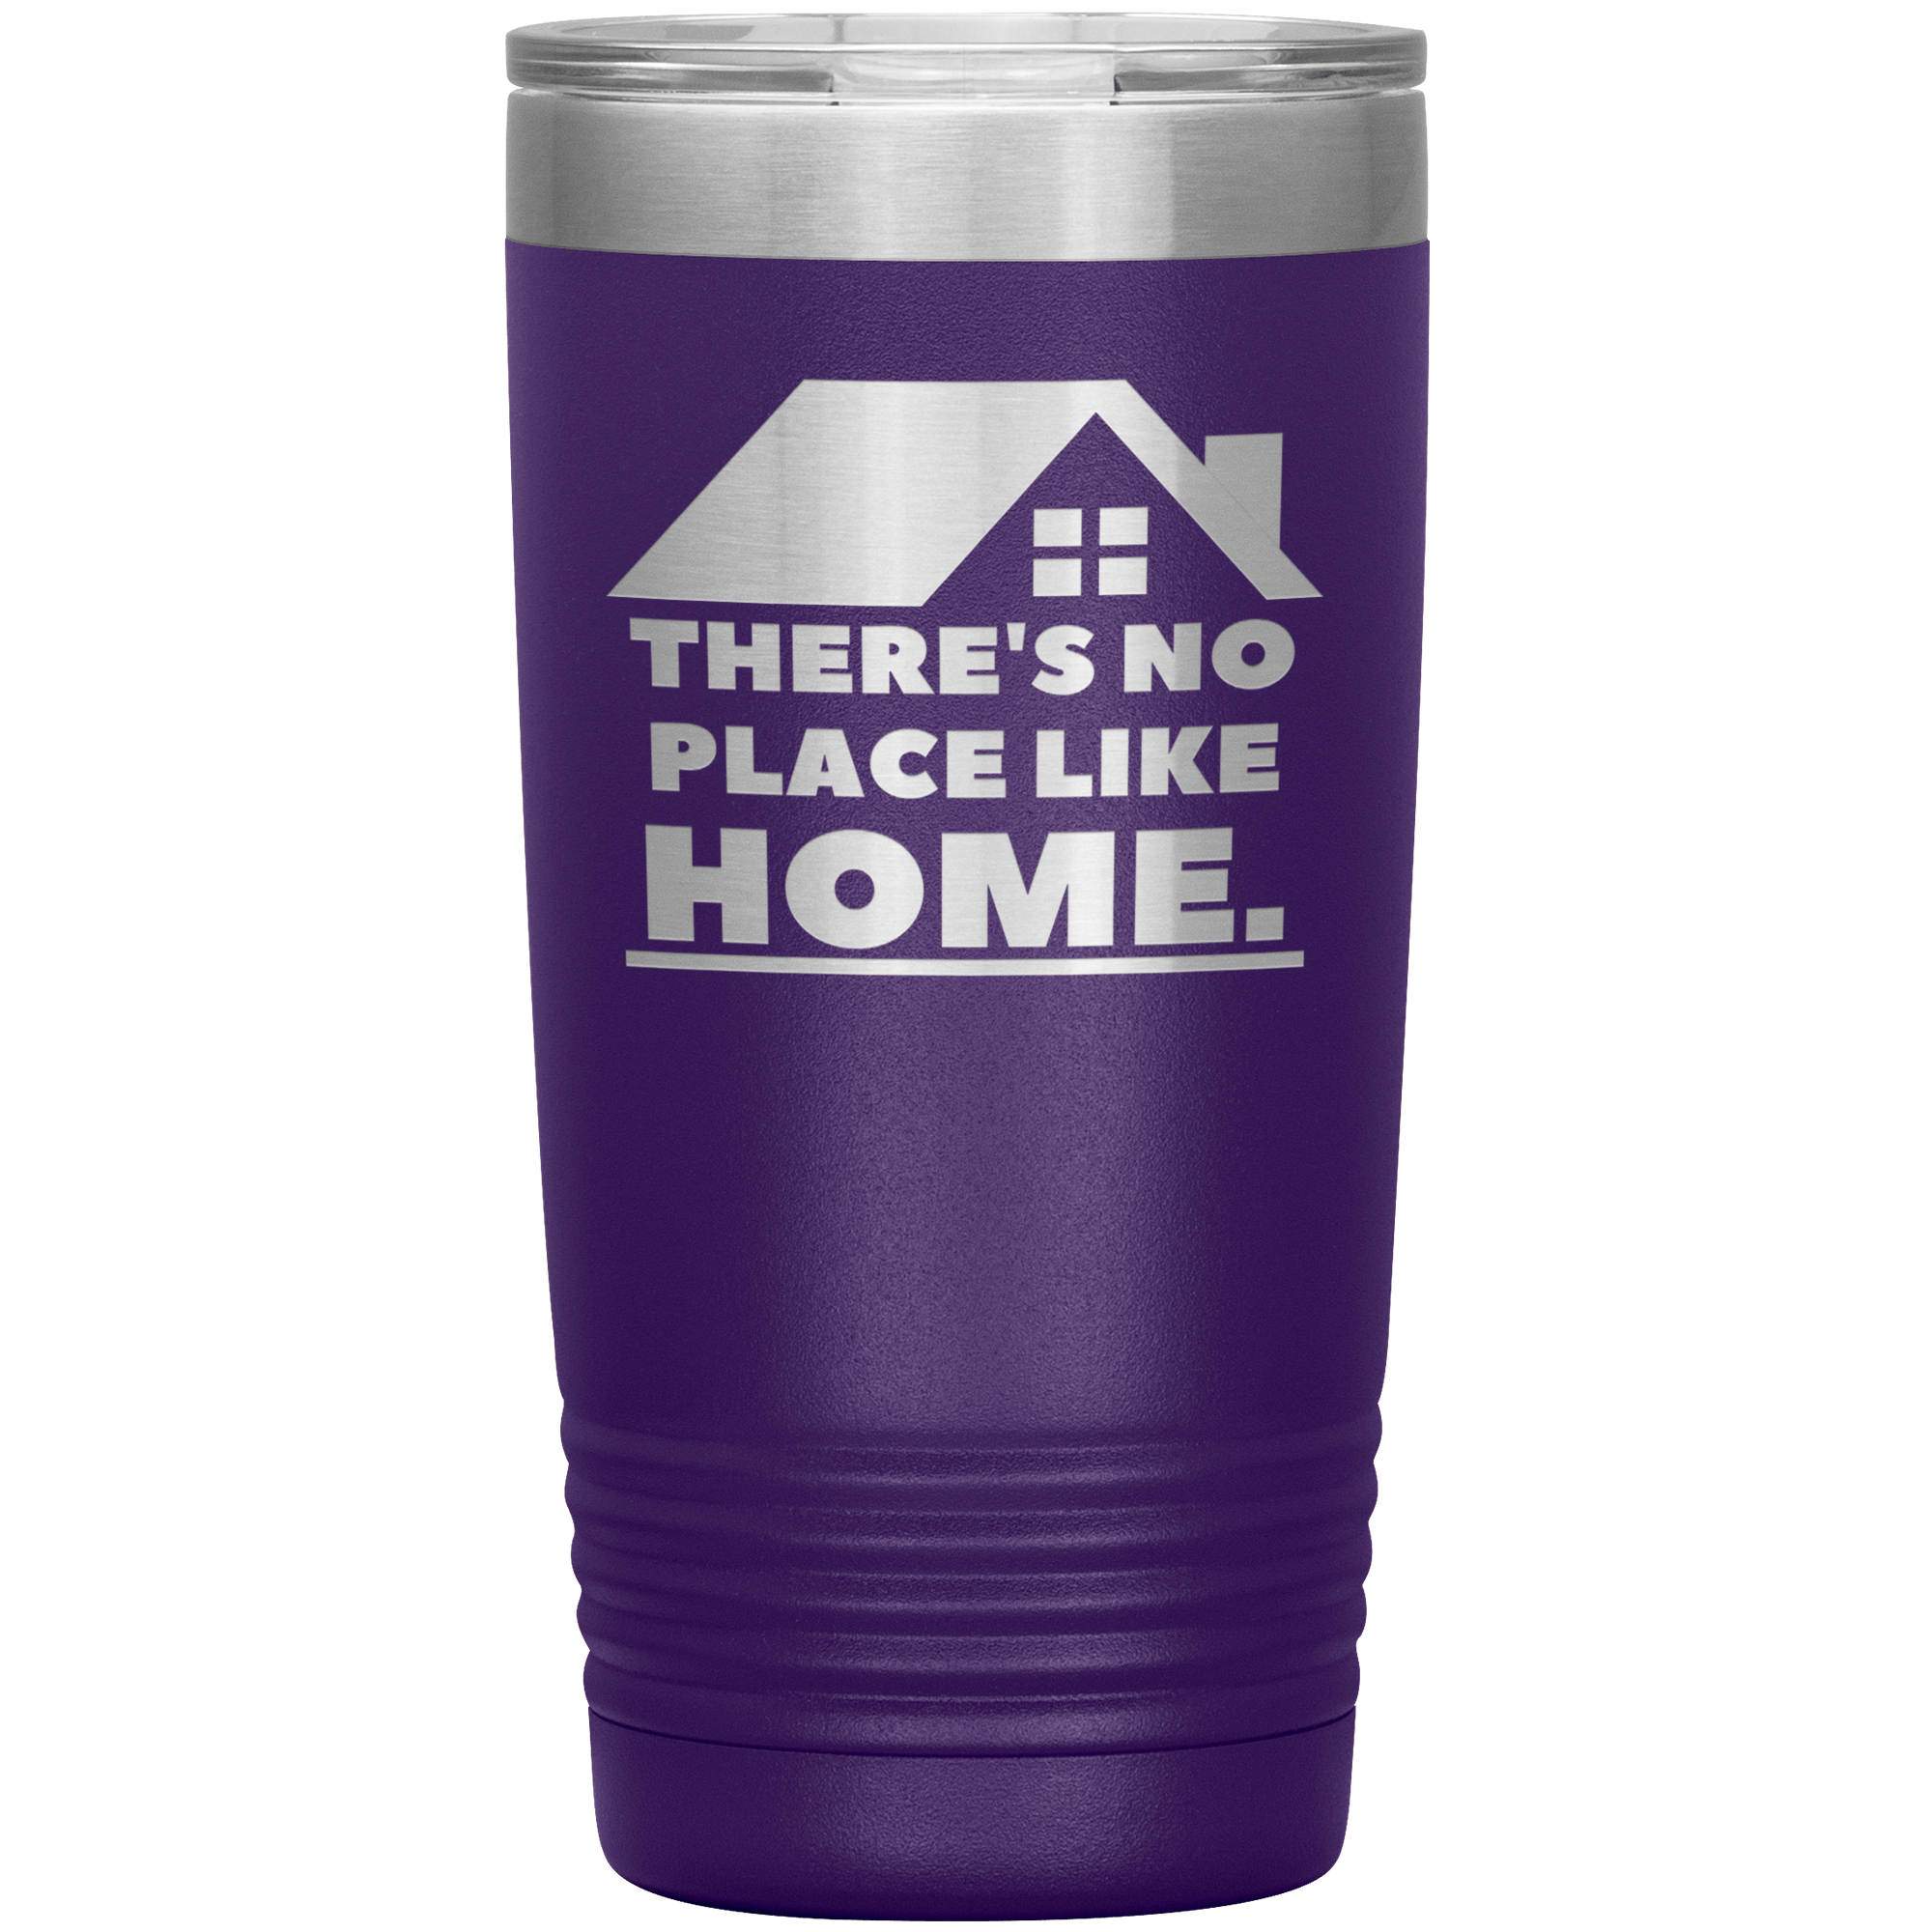 "THERE'S NO PLACE LIKE HOME" Tumbler.